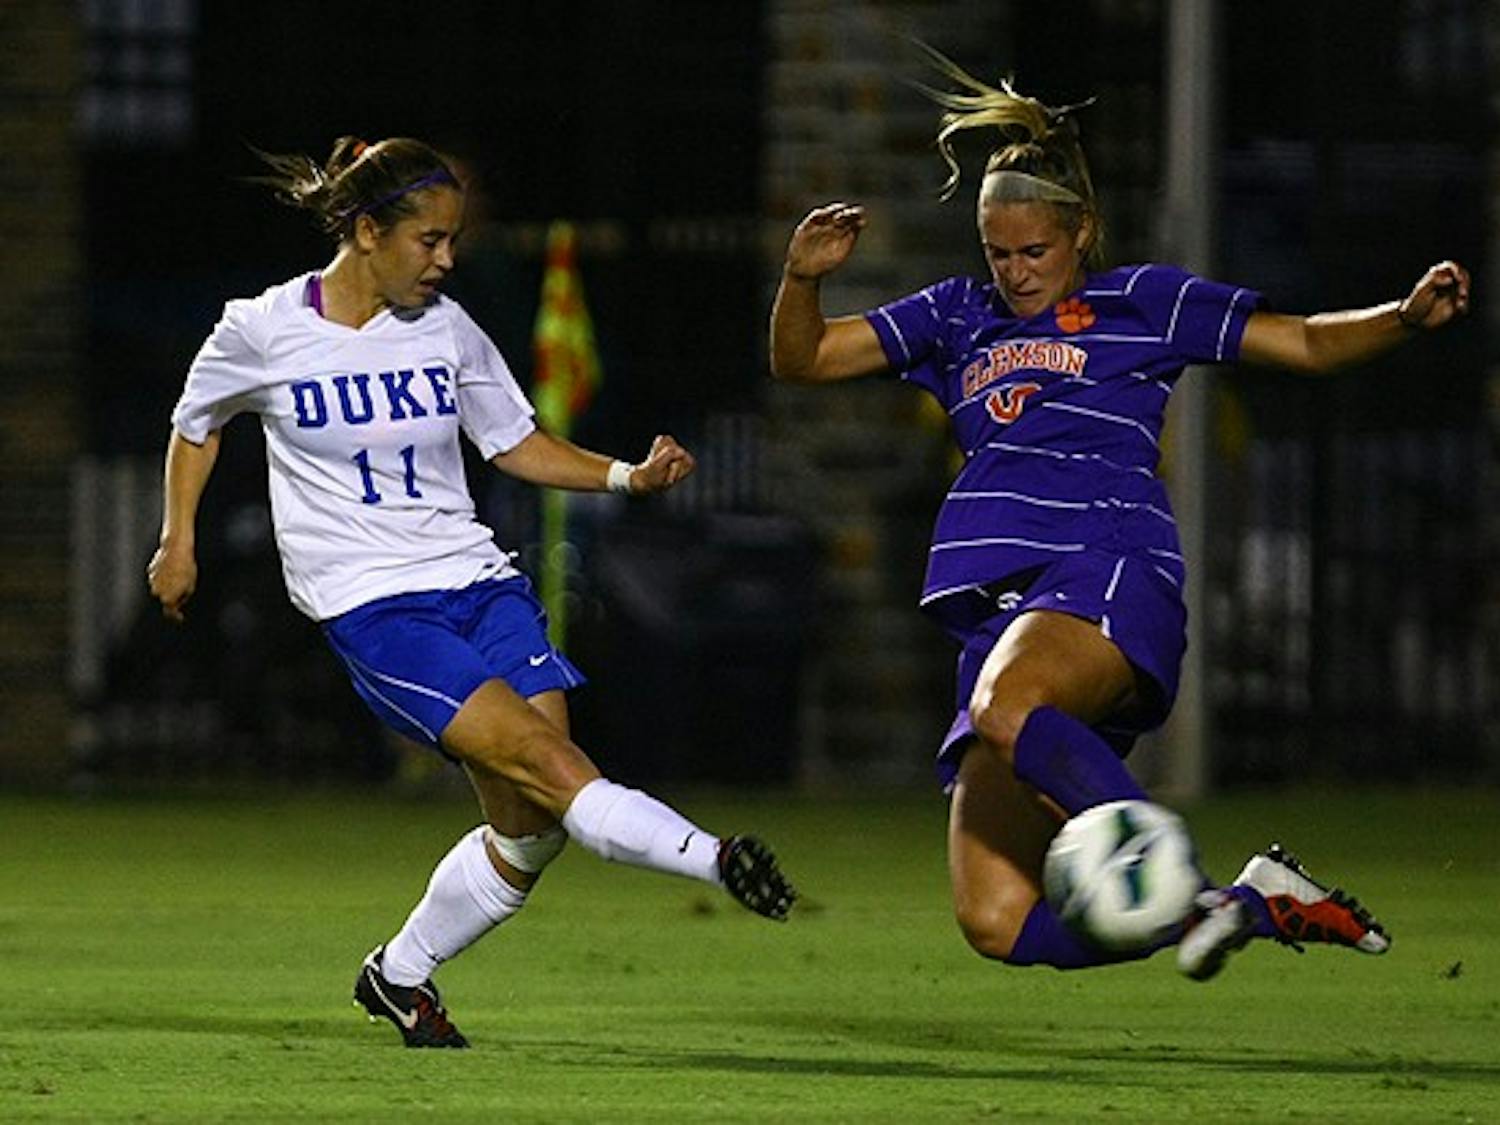 After moving to 2-1-1 in ACC play against Clemson Thursday, the Blue Devils face a tough test against No. 3 Virginia Sunday.